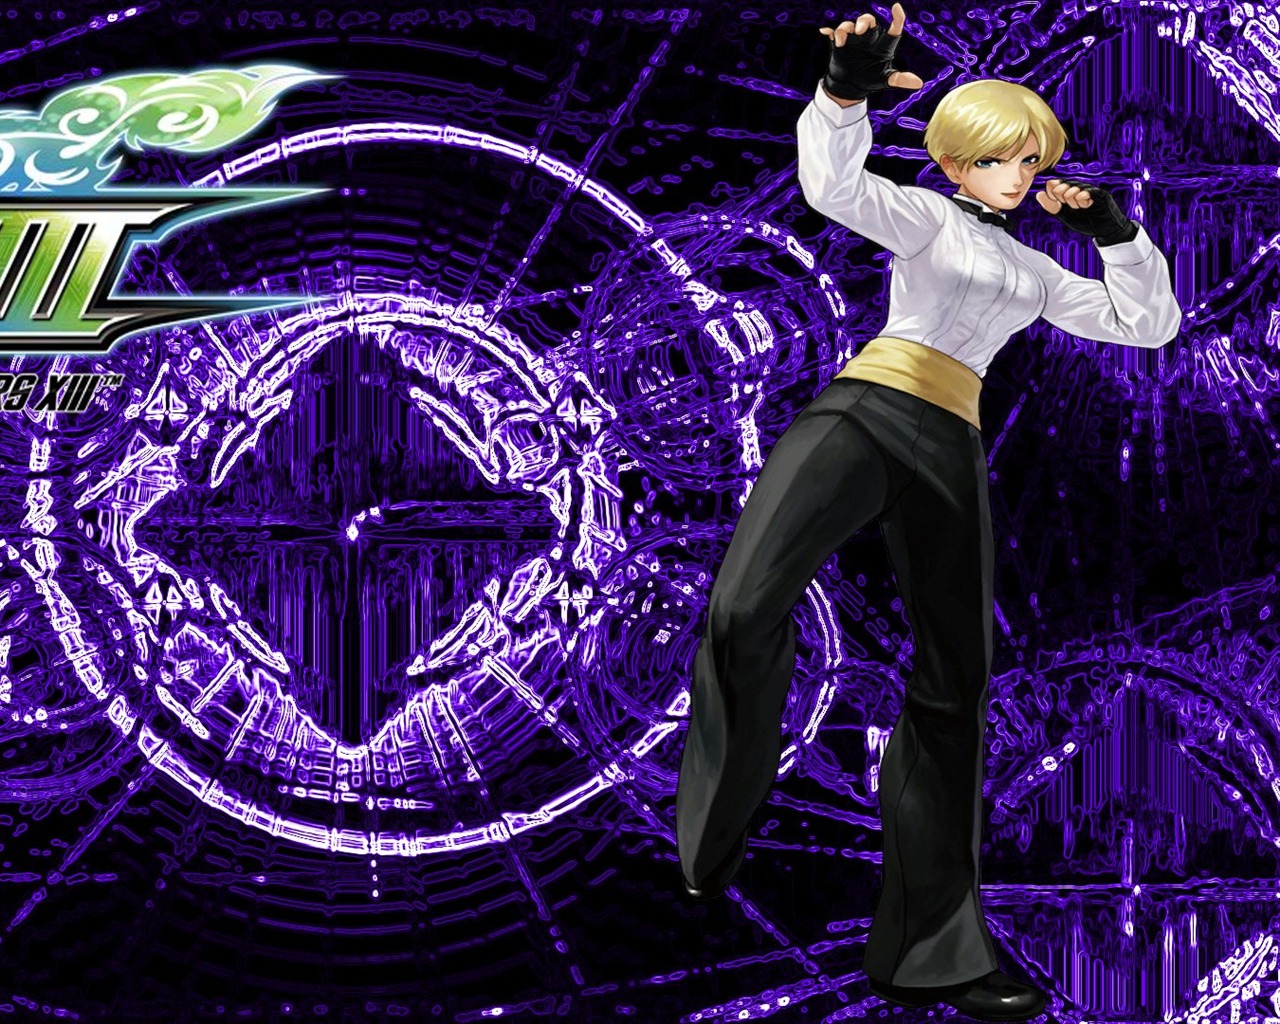 The King of Fighters XIII 拳皇13 壁纸专辑9 - 1280x1024